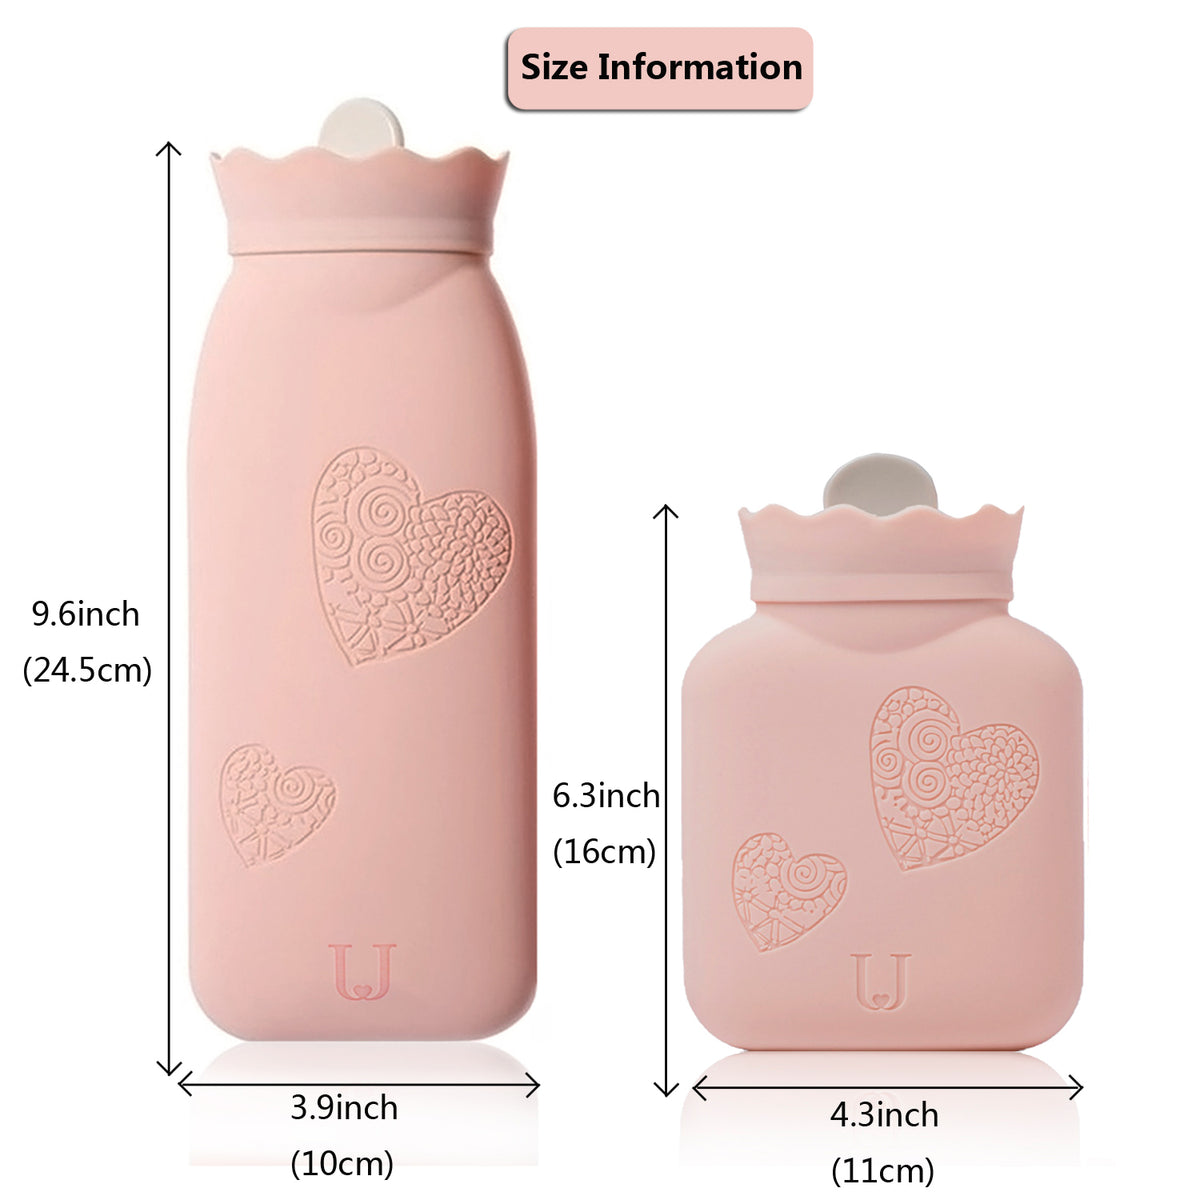 Microwaveable Hot Water Bottle with Cover(1 liter), MEETRUE Innovative BPA-Free Silicone Hot Water Bottle Hot Water Bag for Pain Relief, Hot & Cold